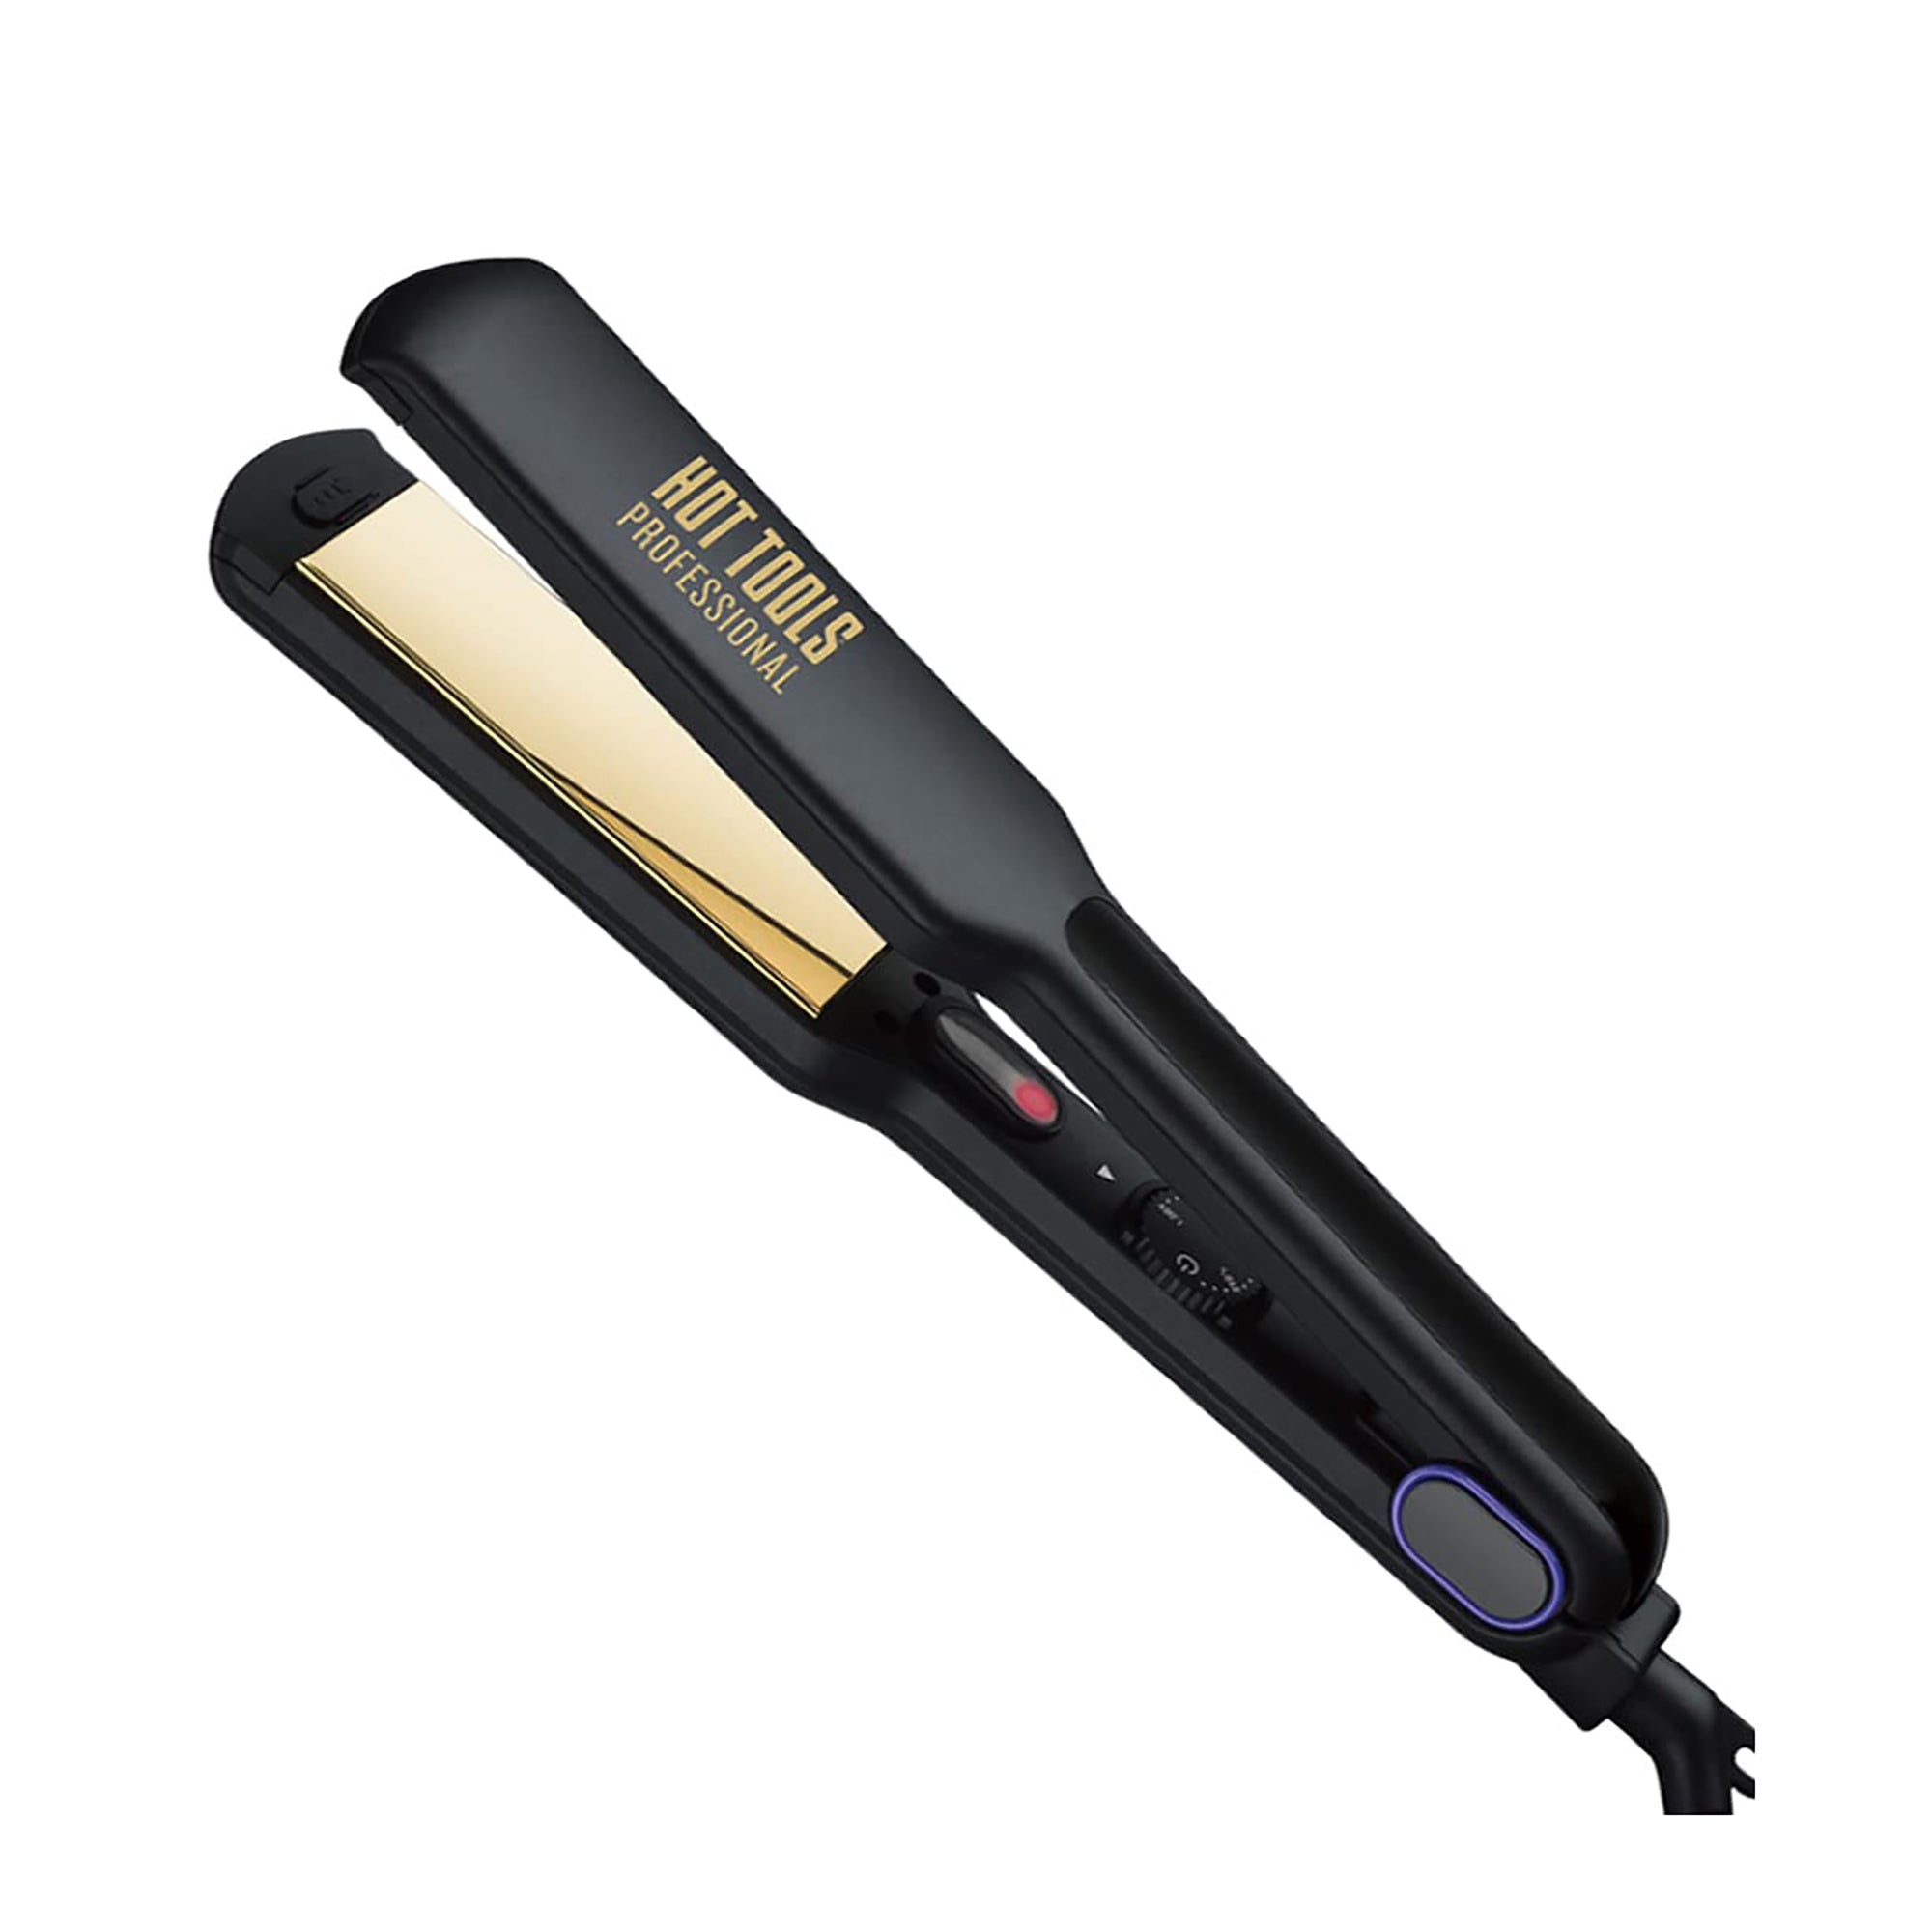 Hot Tools 1" 24K Gold 3- in-1 Interchangeable Flat Iron